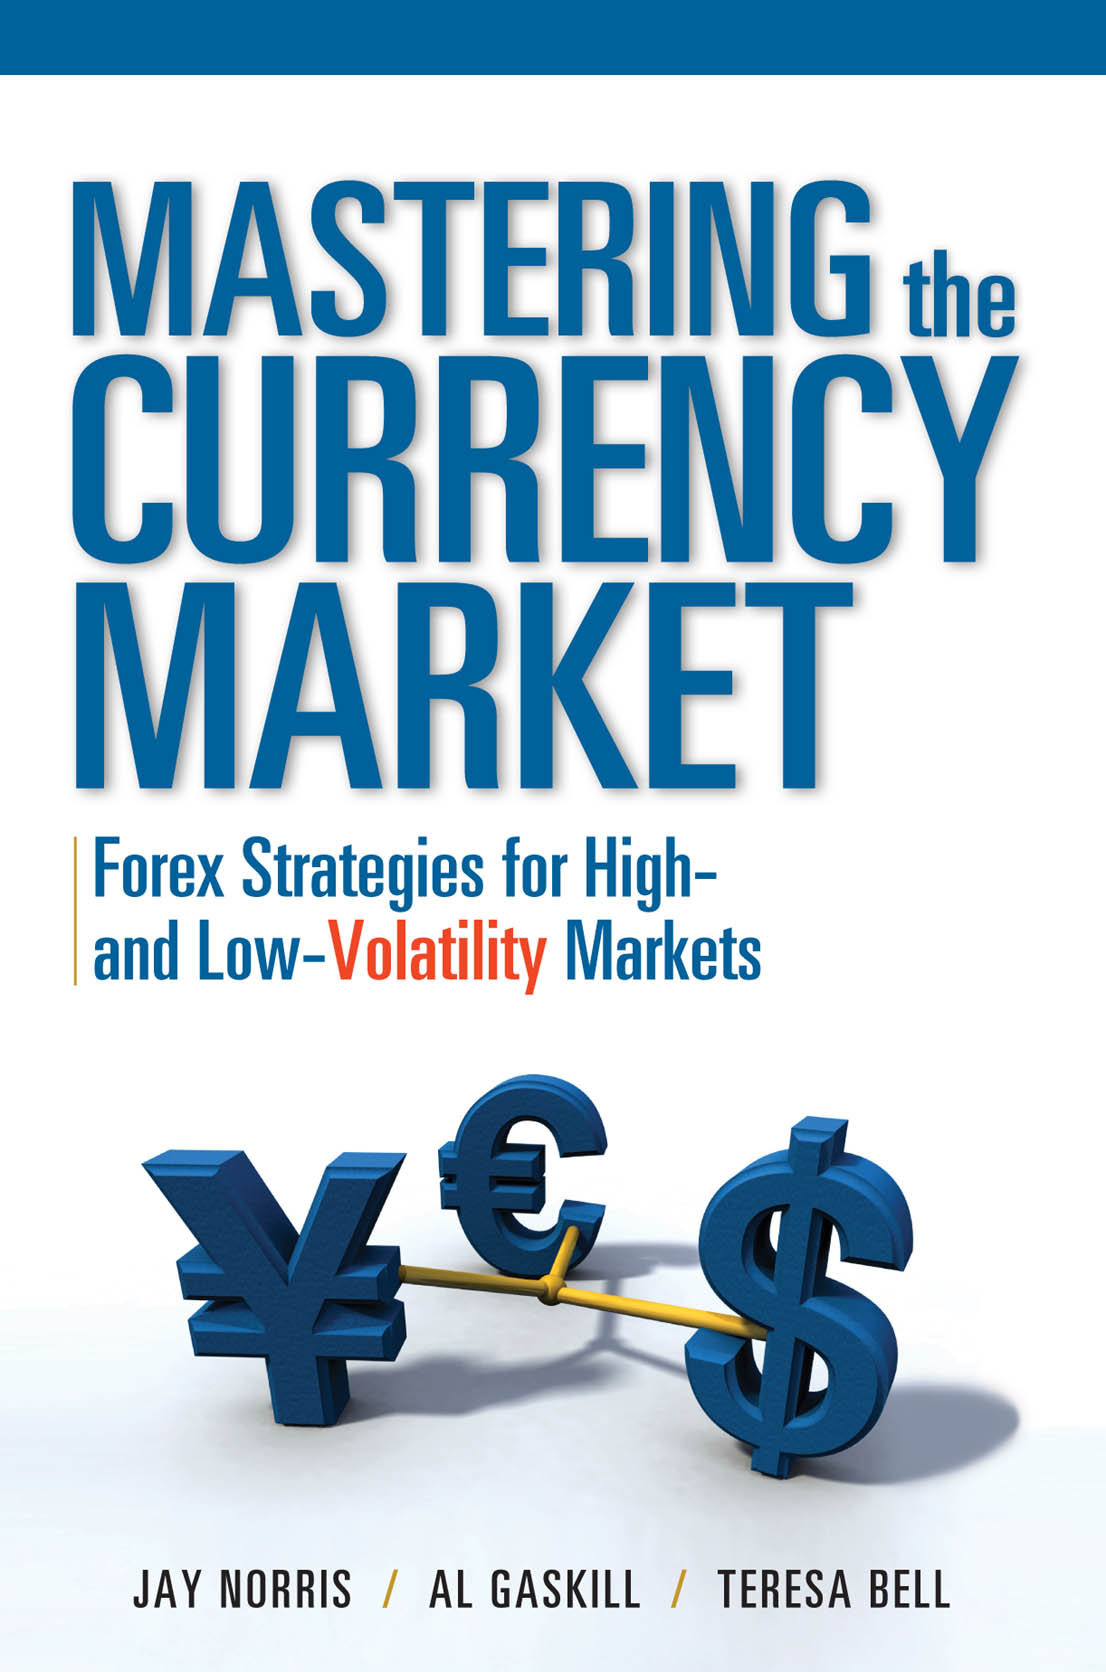 Mastering the Currency Market